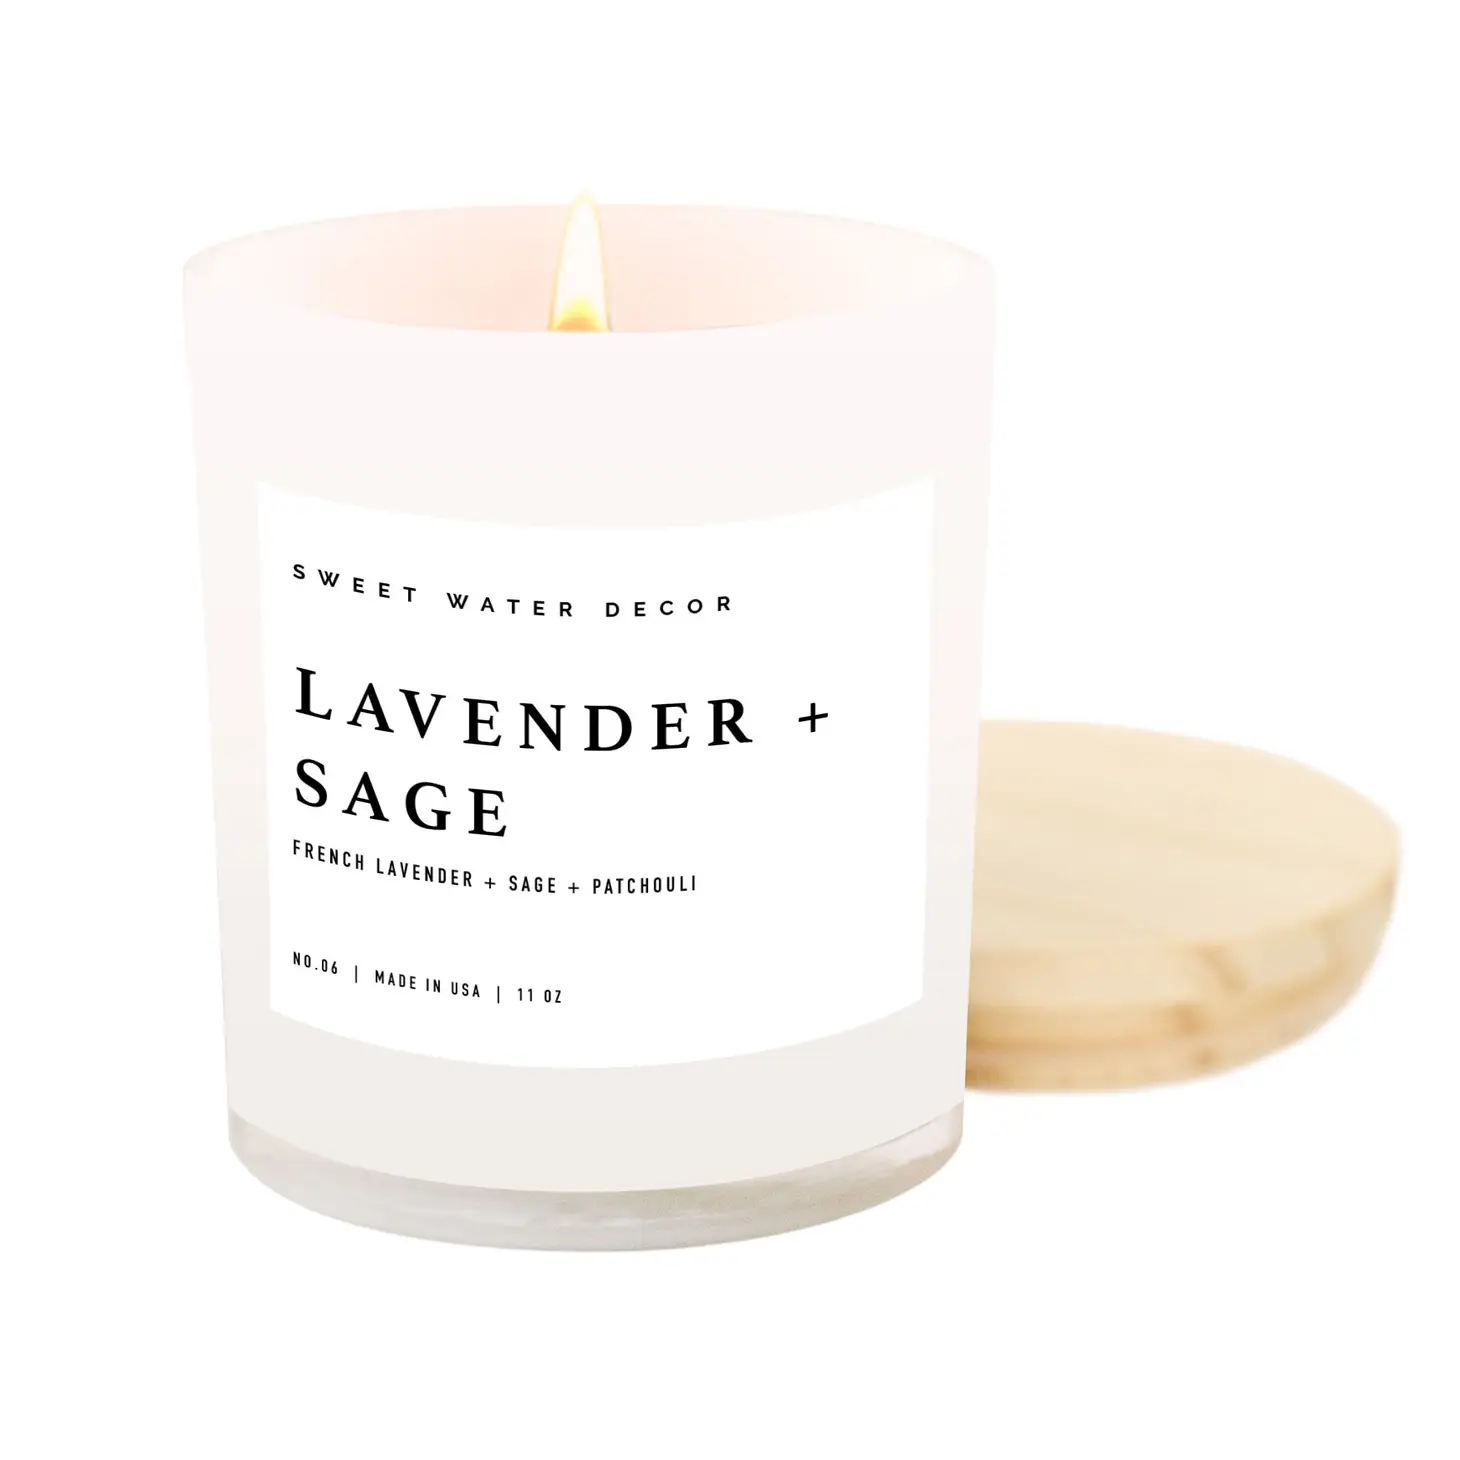 Lavender and Sage Soy Candle - White Jar - 11 oz | Sweet Water Decor